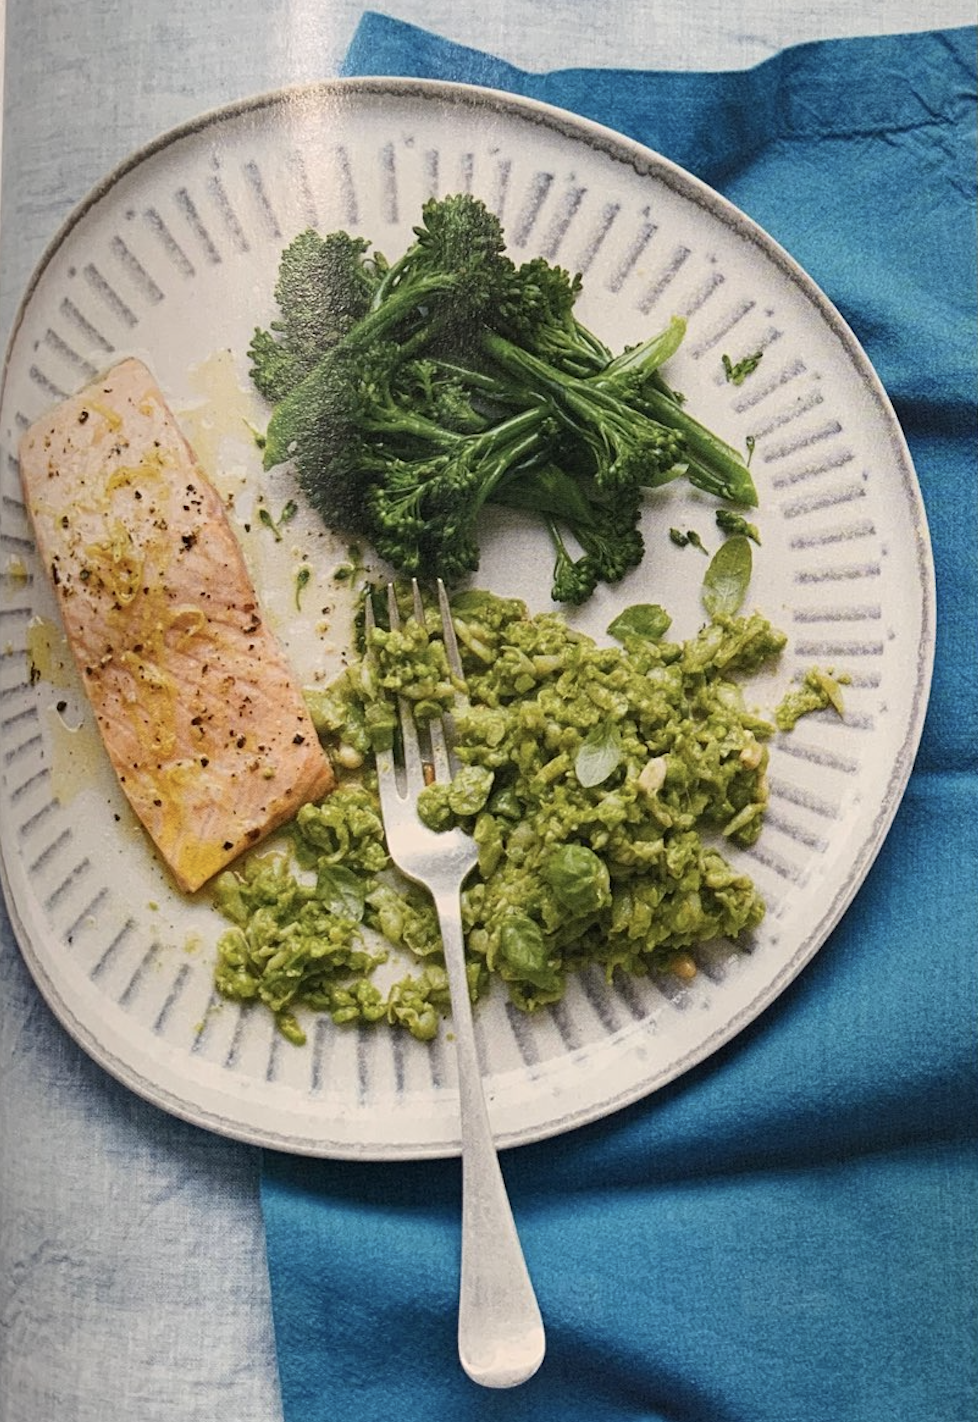 Grilled Salmon With Mashed Beans and Pesto